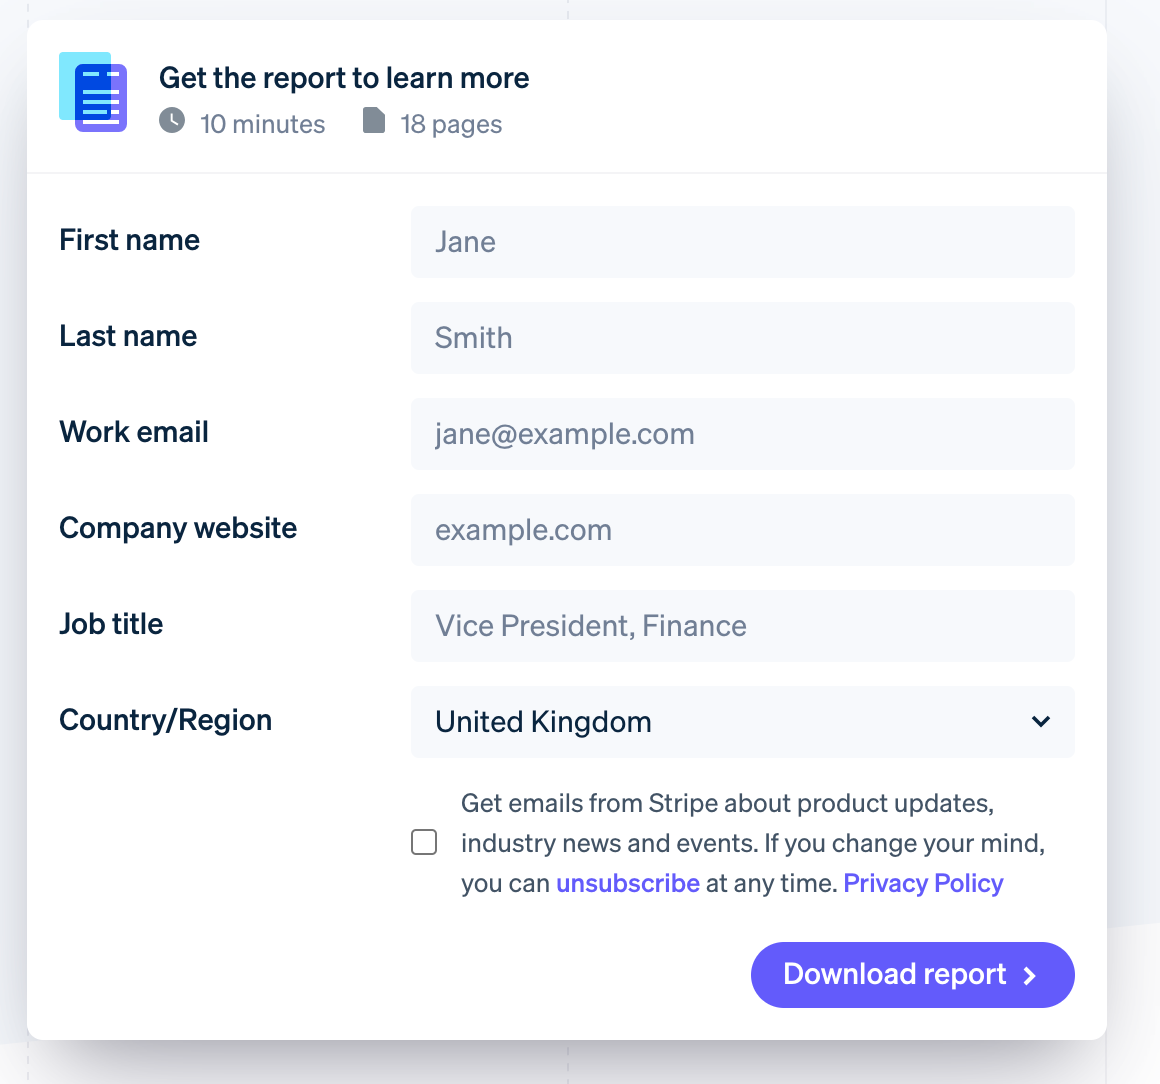 "Get the report to learn more" lead capture form from Stripe's website